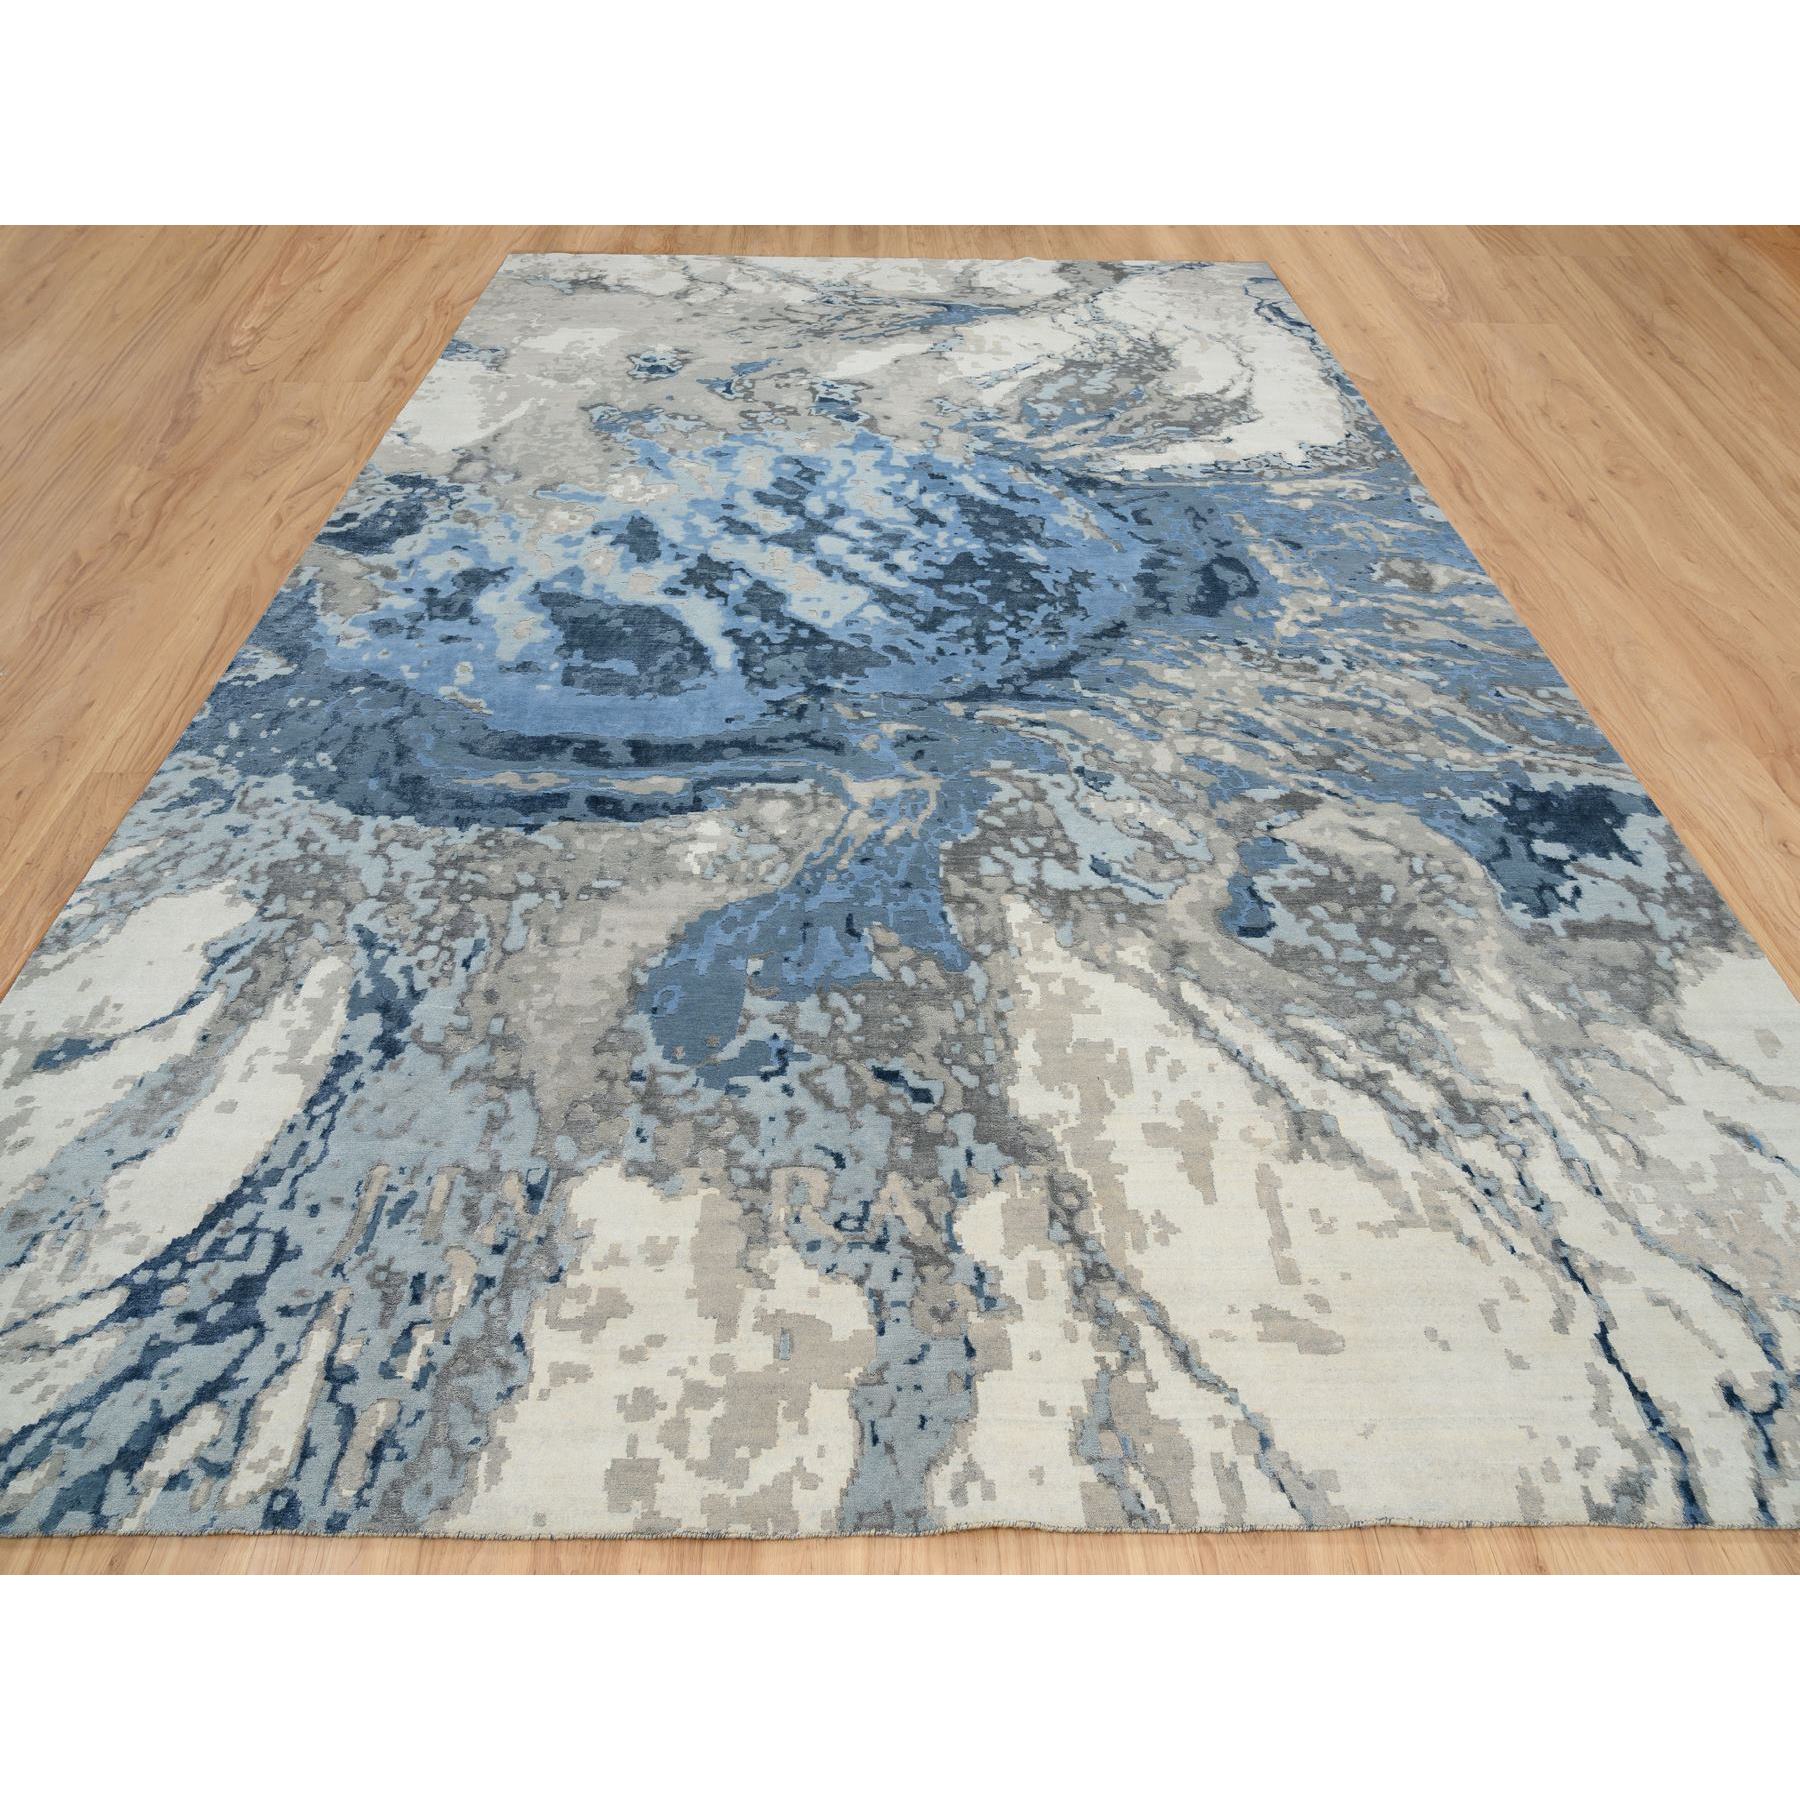 12'x17'9" Beige and Blue, Hand Woven Abstract Design, Hi-Low Pile Wool and Silk, Oversized Oriental Rug 